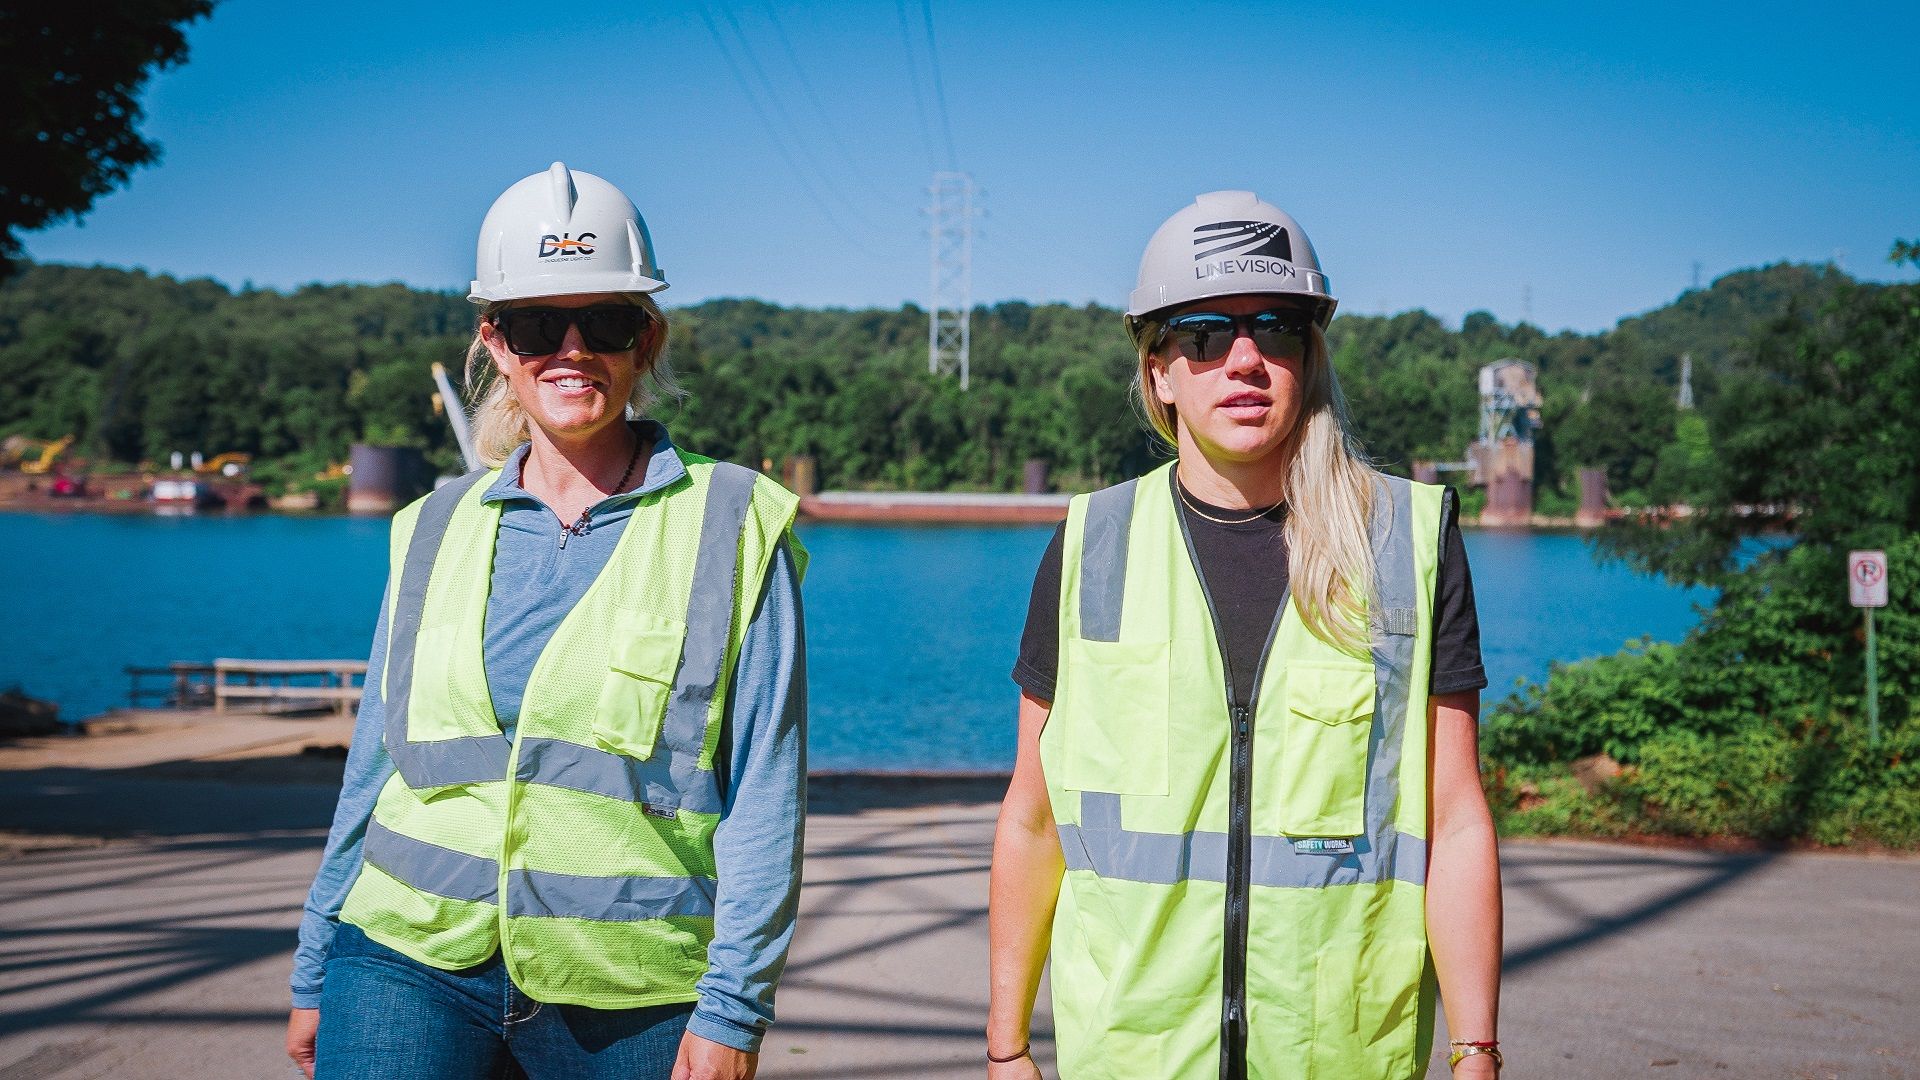 Dr. Elizabeth Cook, DLC's general manager of advanced grid solutions (left), and Tiffany Menhorn, senior director of LineVision, watching crews install sensors for the dynamic line rating project.